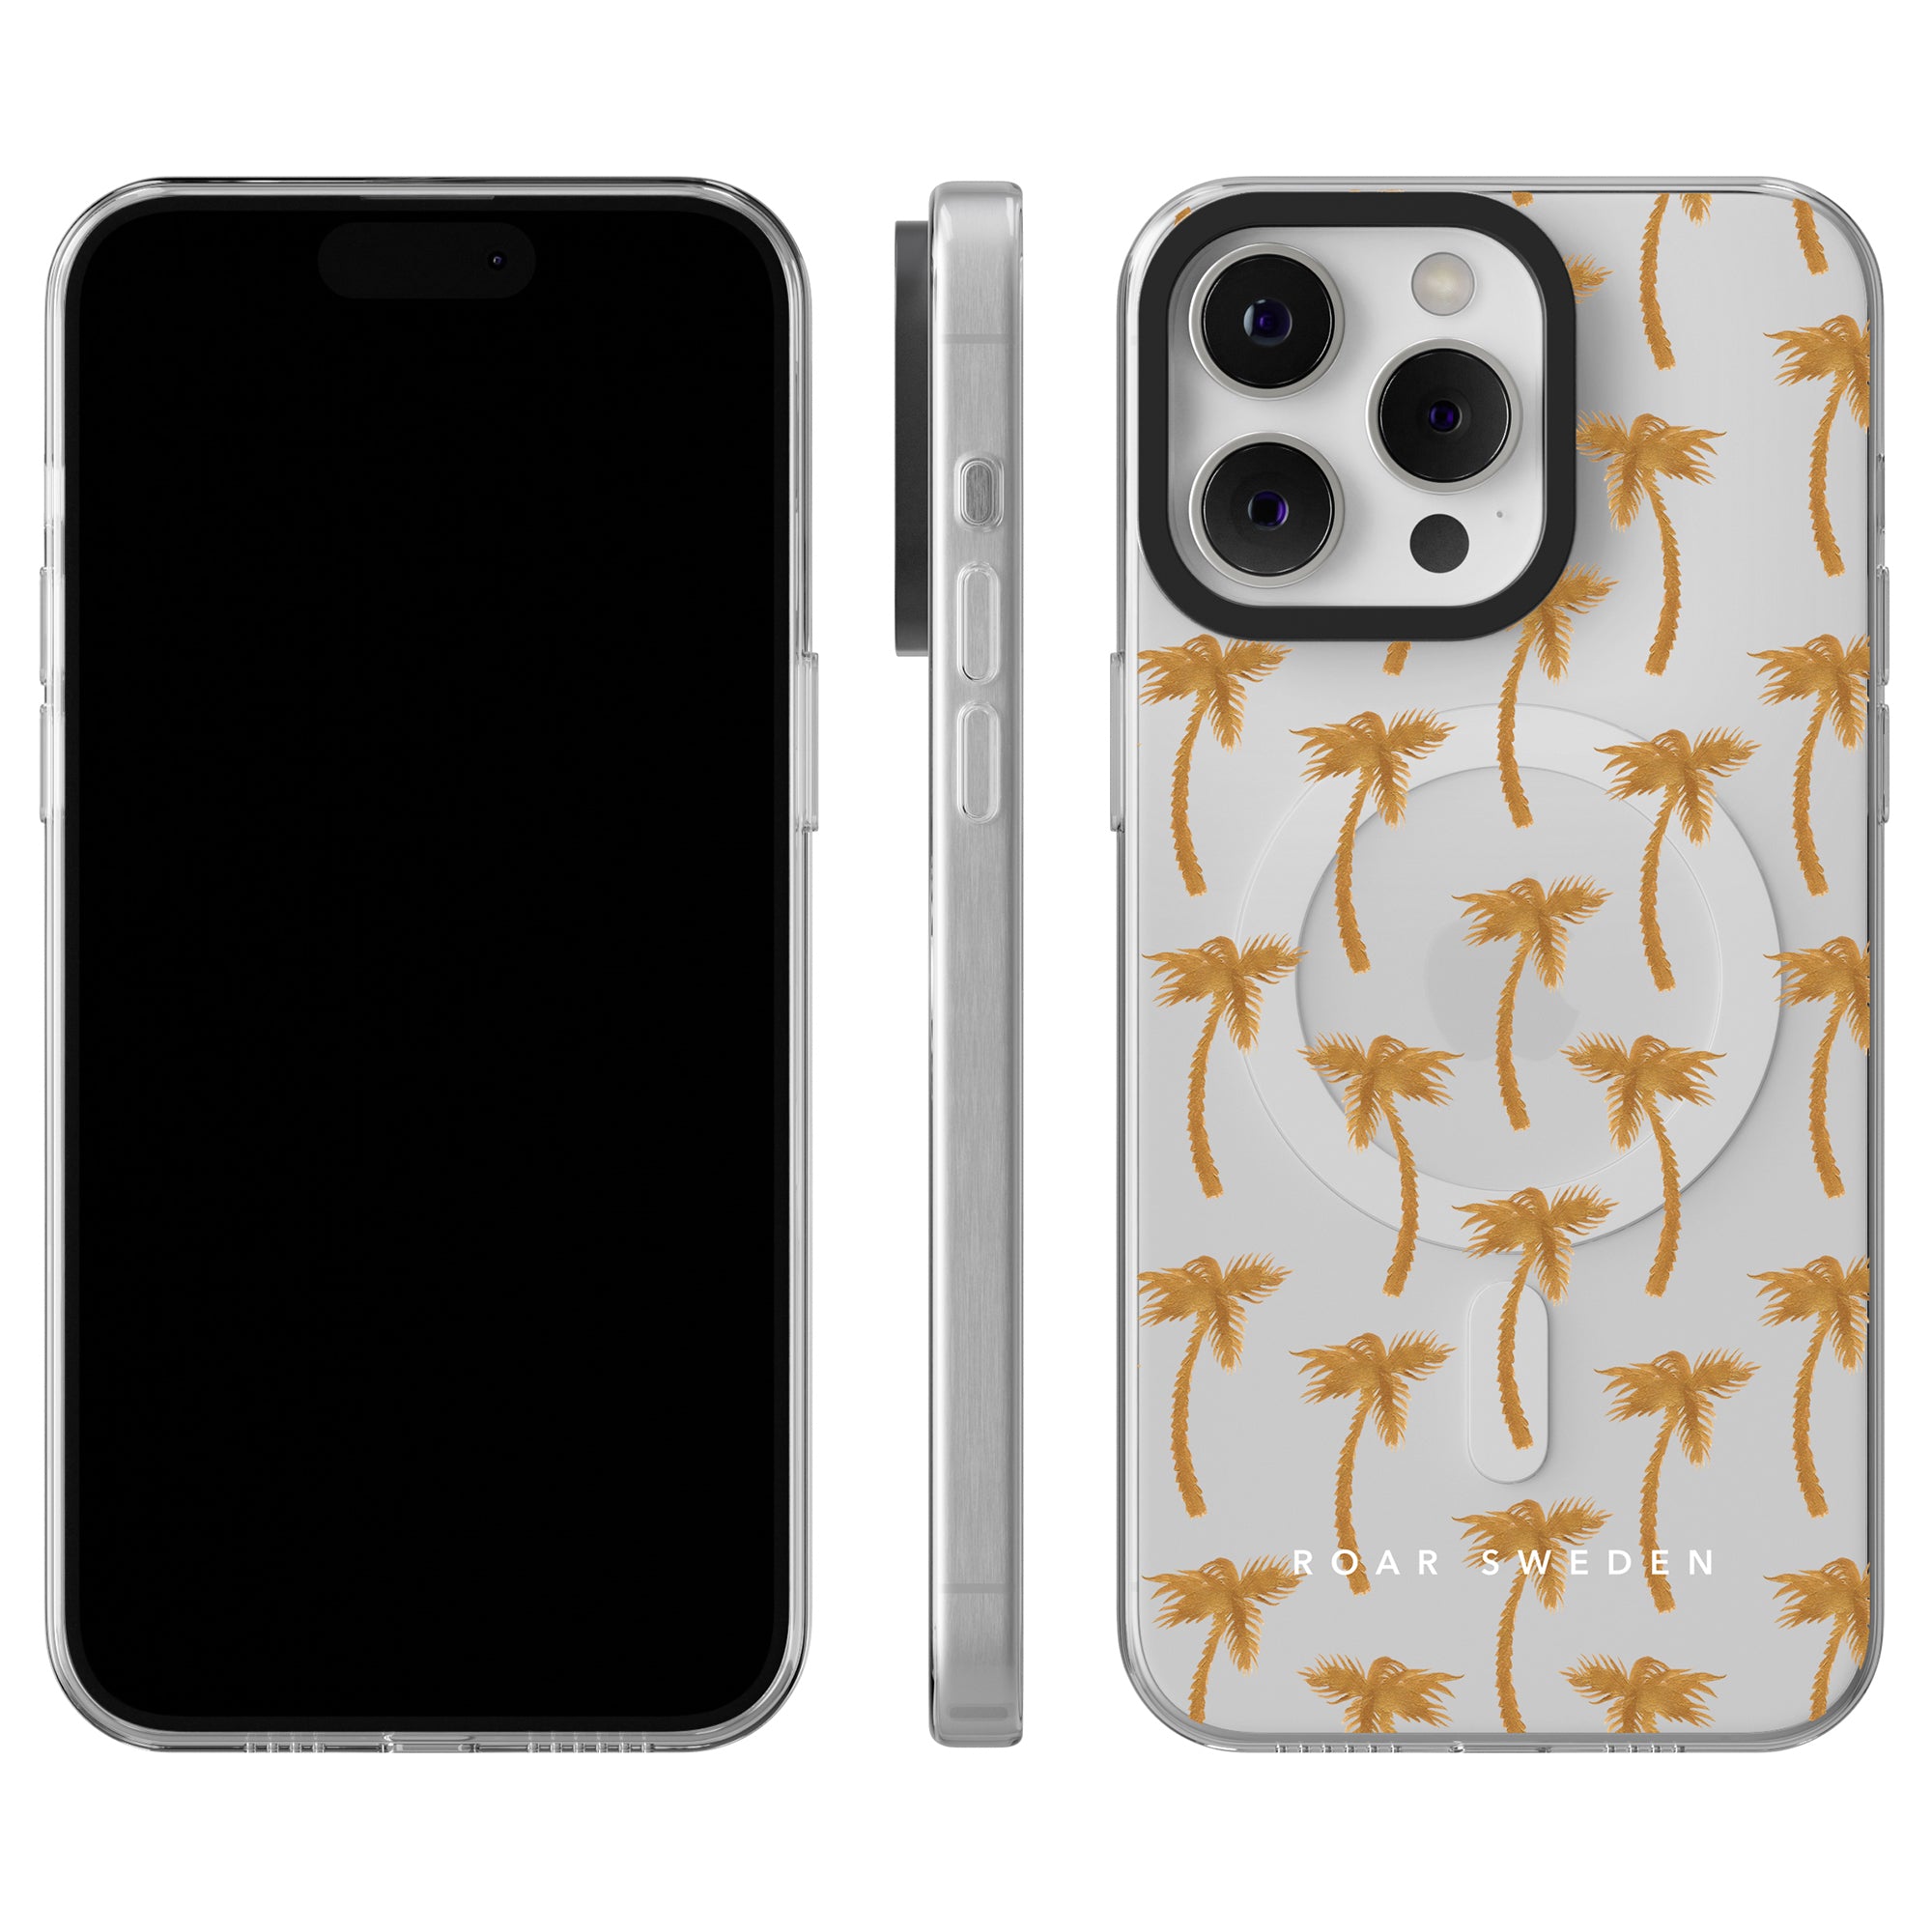 Image of a smartphone alongside a case, shown from the front, side, and back. Part of the Jungle Collection, the case features a white background with a pattern of Golden Palms - MagSafe and the text "ROAR SWEDEN" at the bottom.